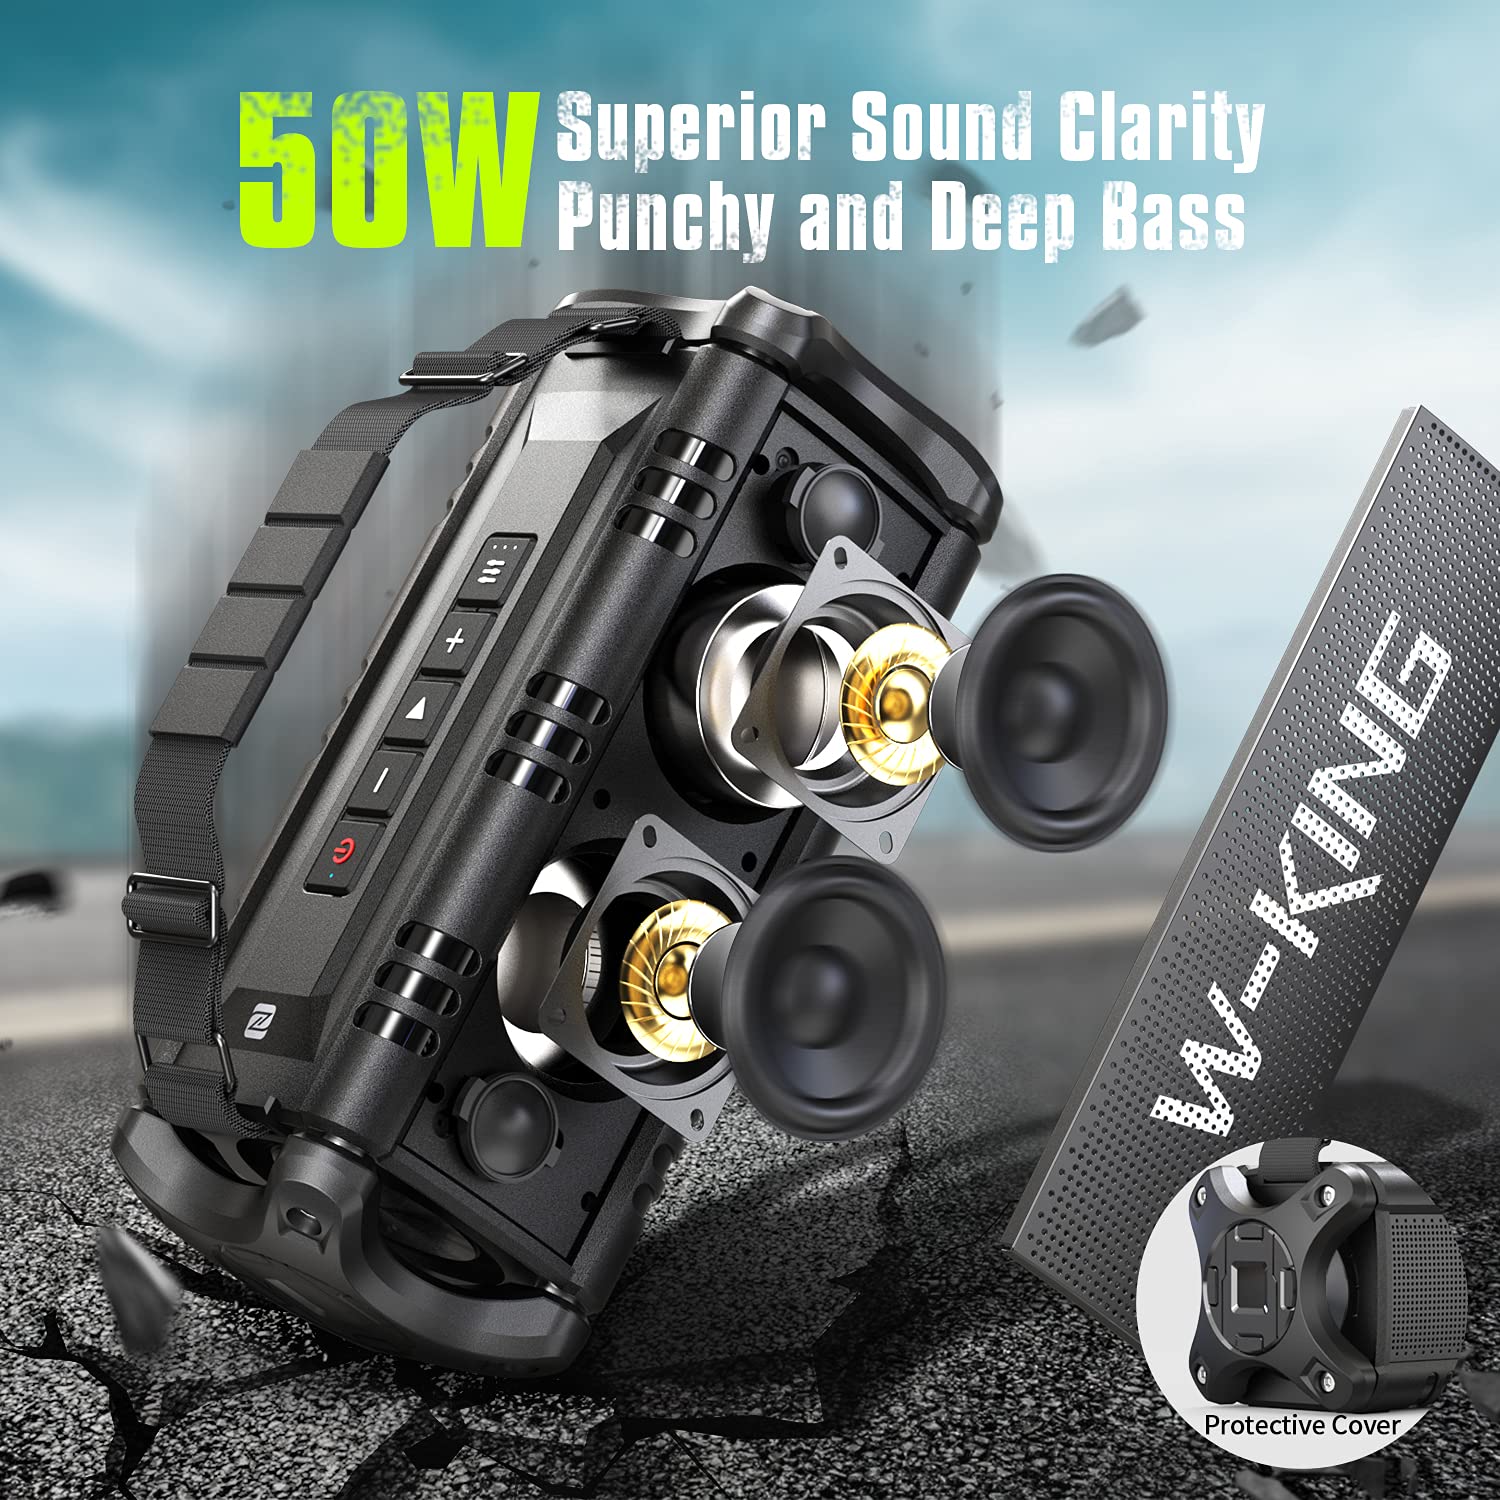 W-KING Bluetooth Speaker, 50W IPX6 Waterproof Loud Wireless, Large Outdoor Portable with Subwoofer for Deep Bass/Bluetooth 5.0/Power Bank/40H Play/TF/AUX/NFC/EQ